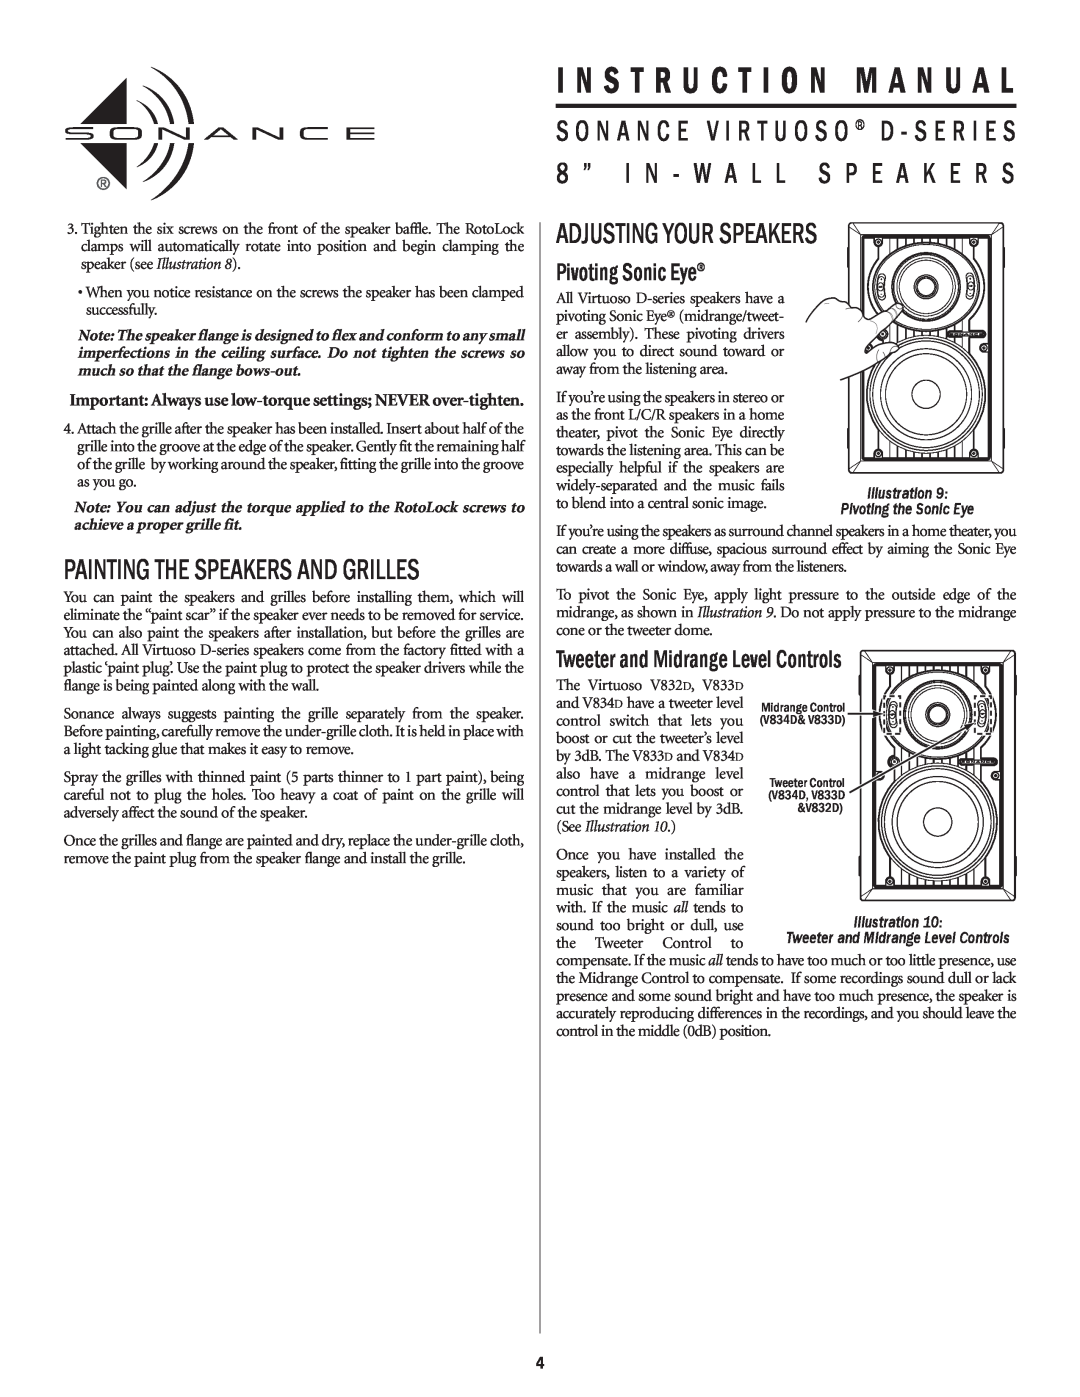 Sonance D-series instruction manual Adjusting Your Speakers, Painting The Speakers And Grilles, Pivoting Sonic Eye 